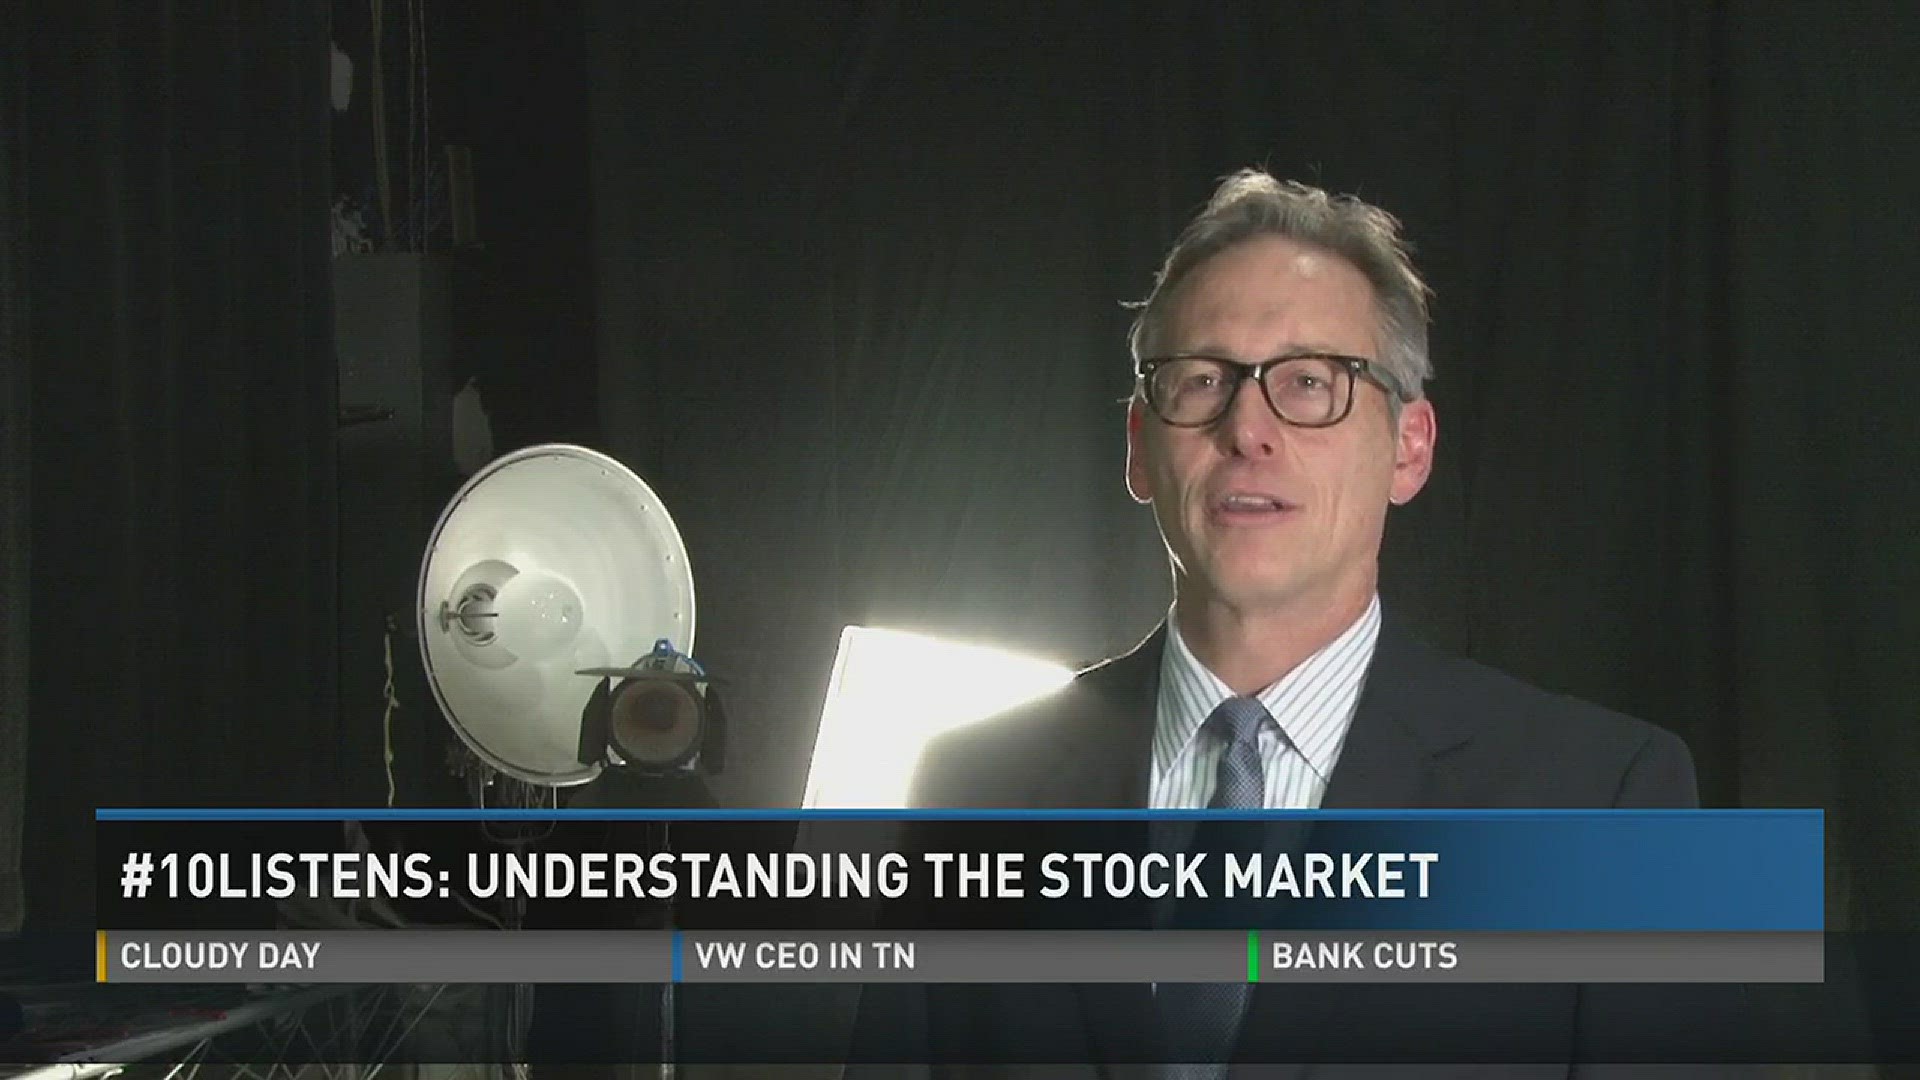 This was a rough week for U.S. stocks and U.S. investors. Here's some insight. Jan. 15, 2016